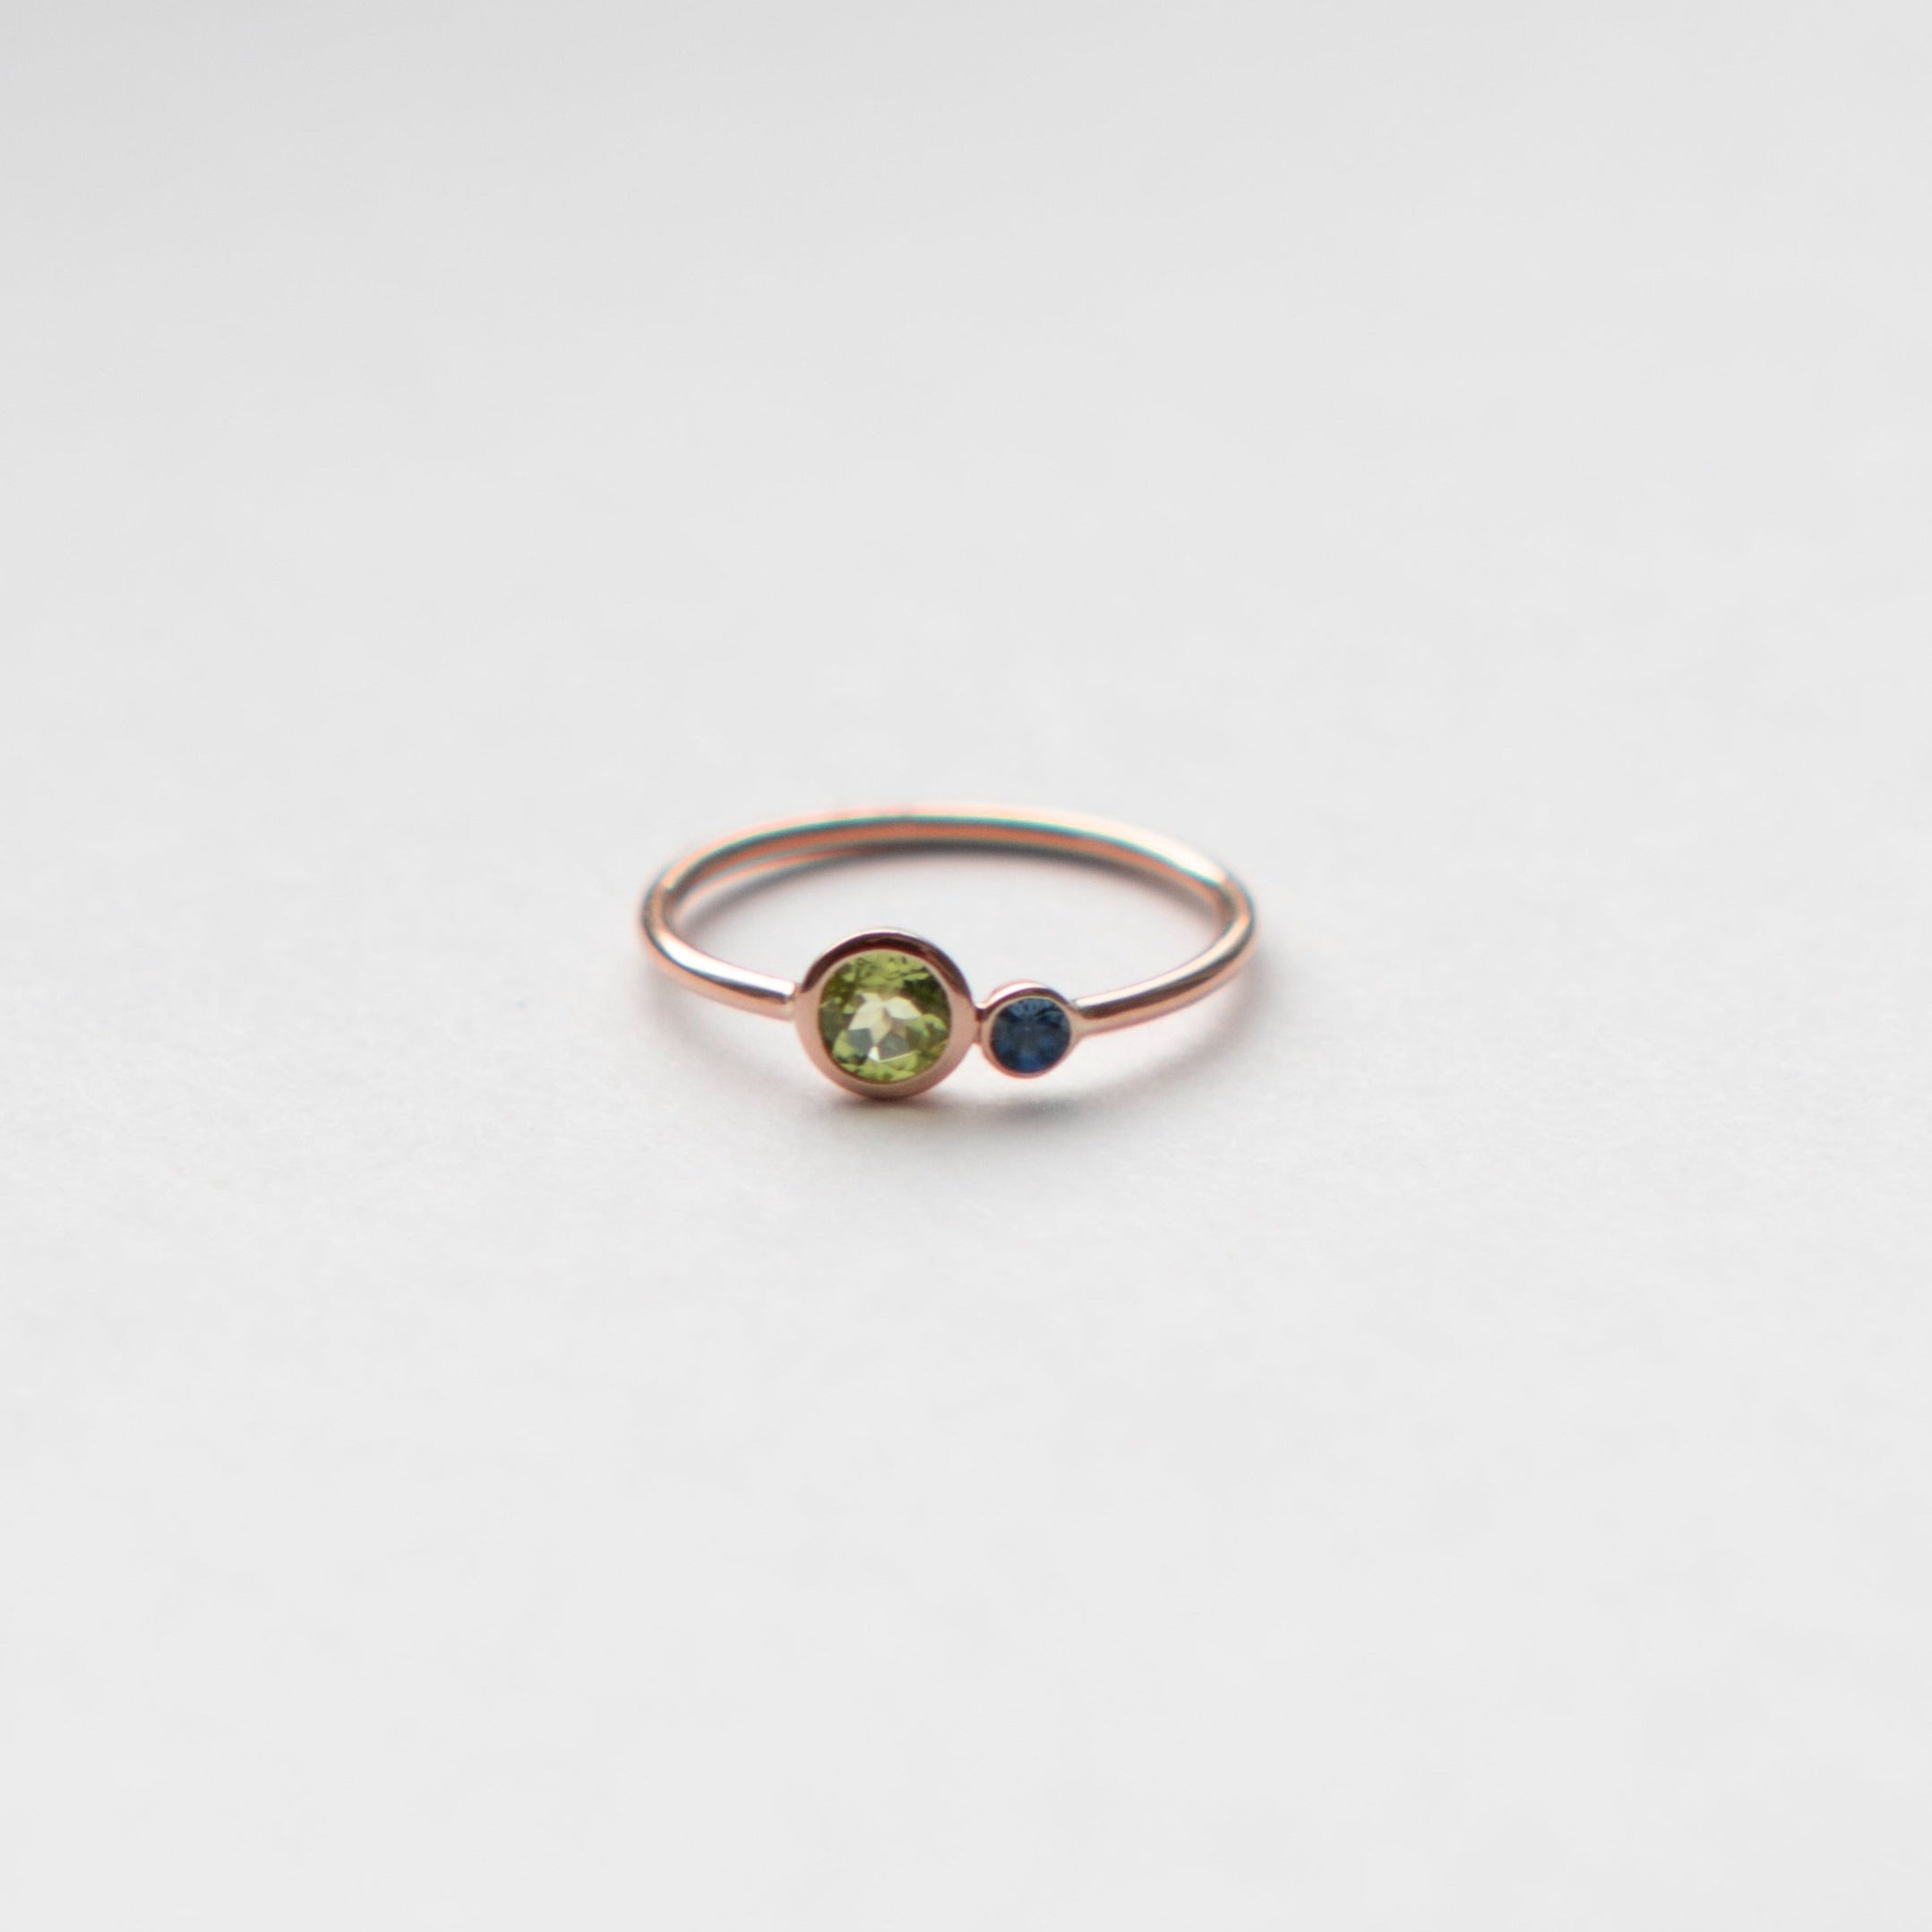 Kiki nontraditional ring in 14k rose gold set with peridot and sapphire